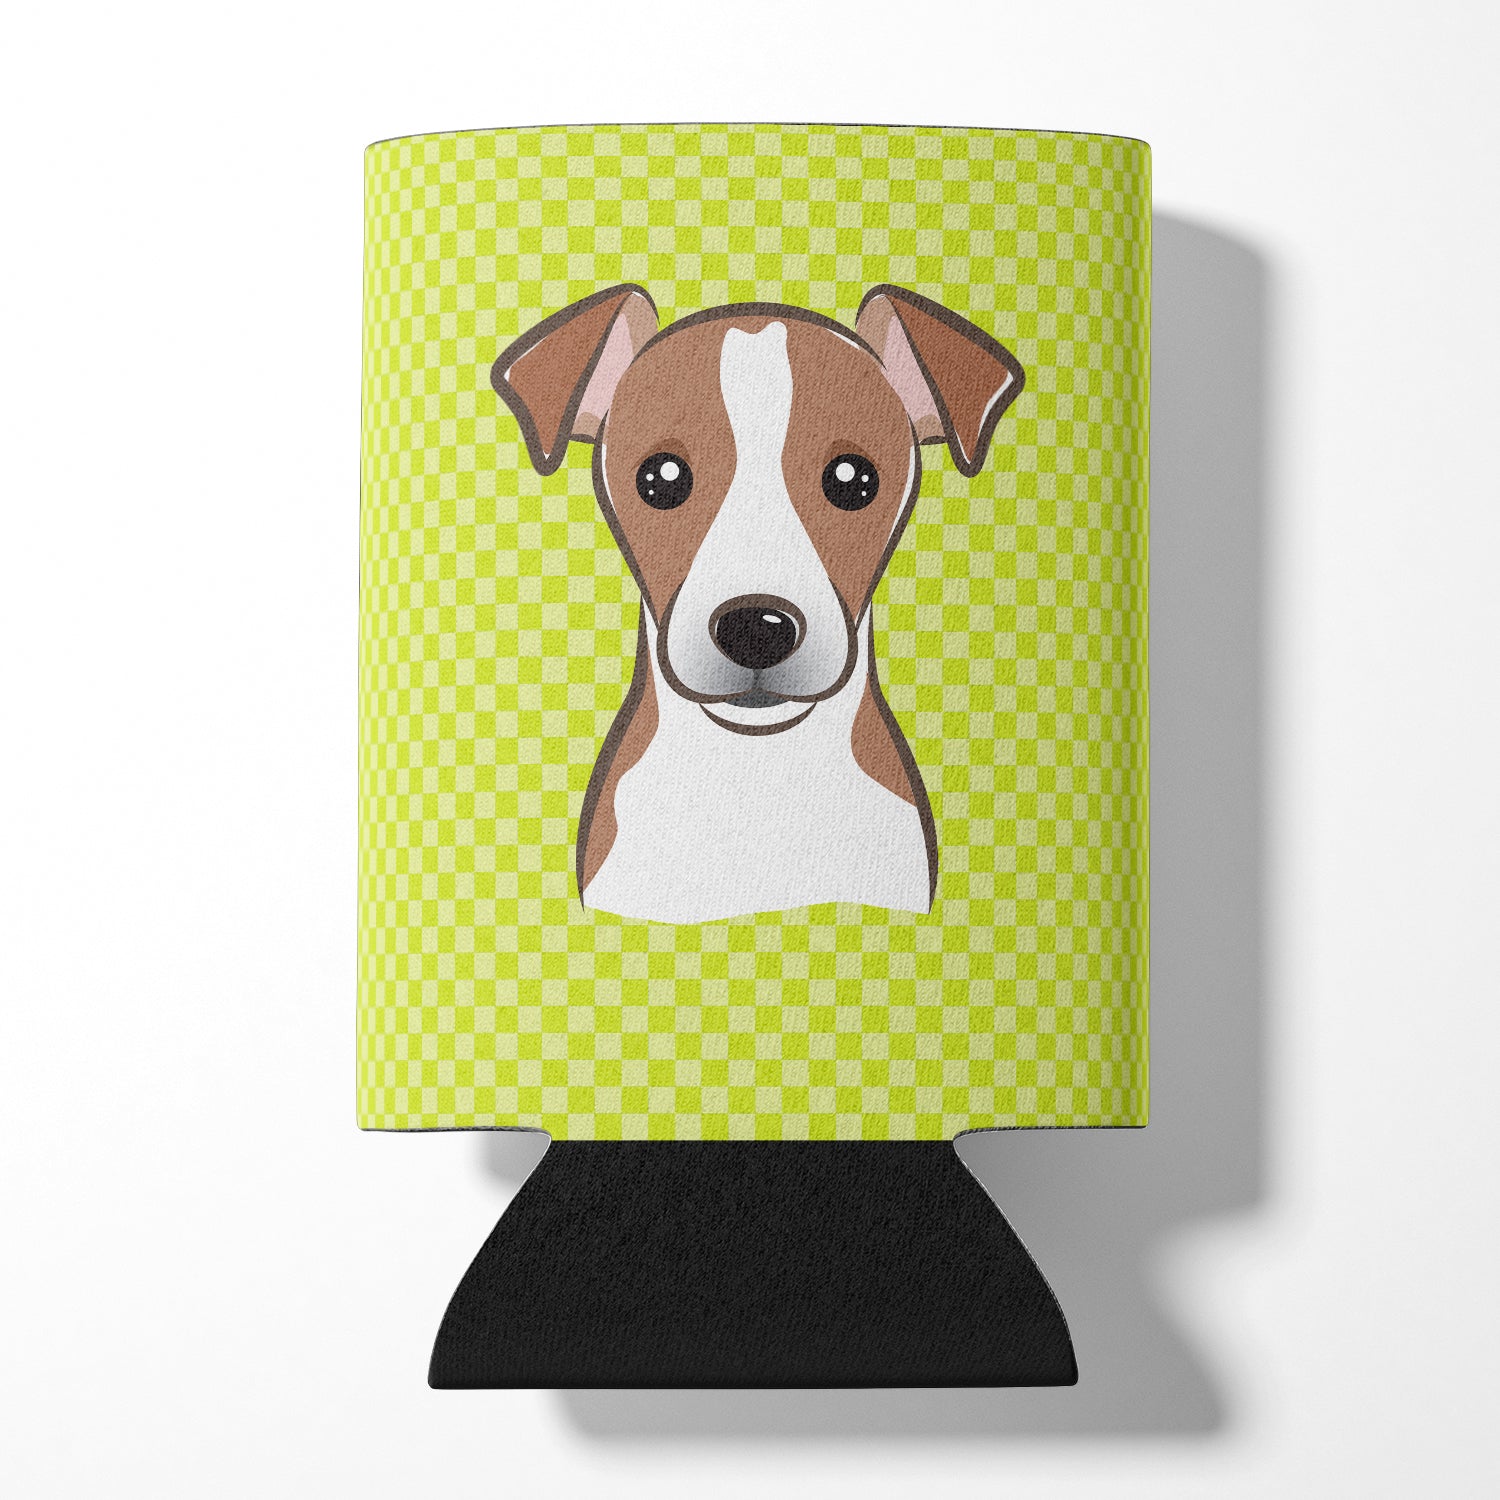 Checkerboard Lime Green Jack Russell Terrier Can ou Bottle Hugger BB1322CC